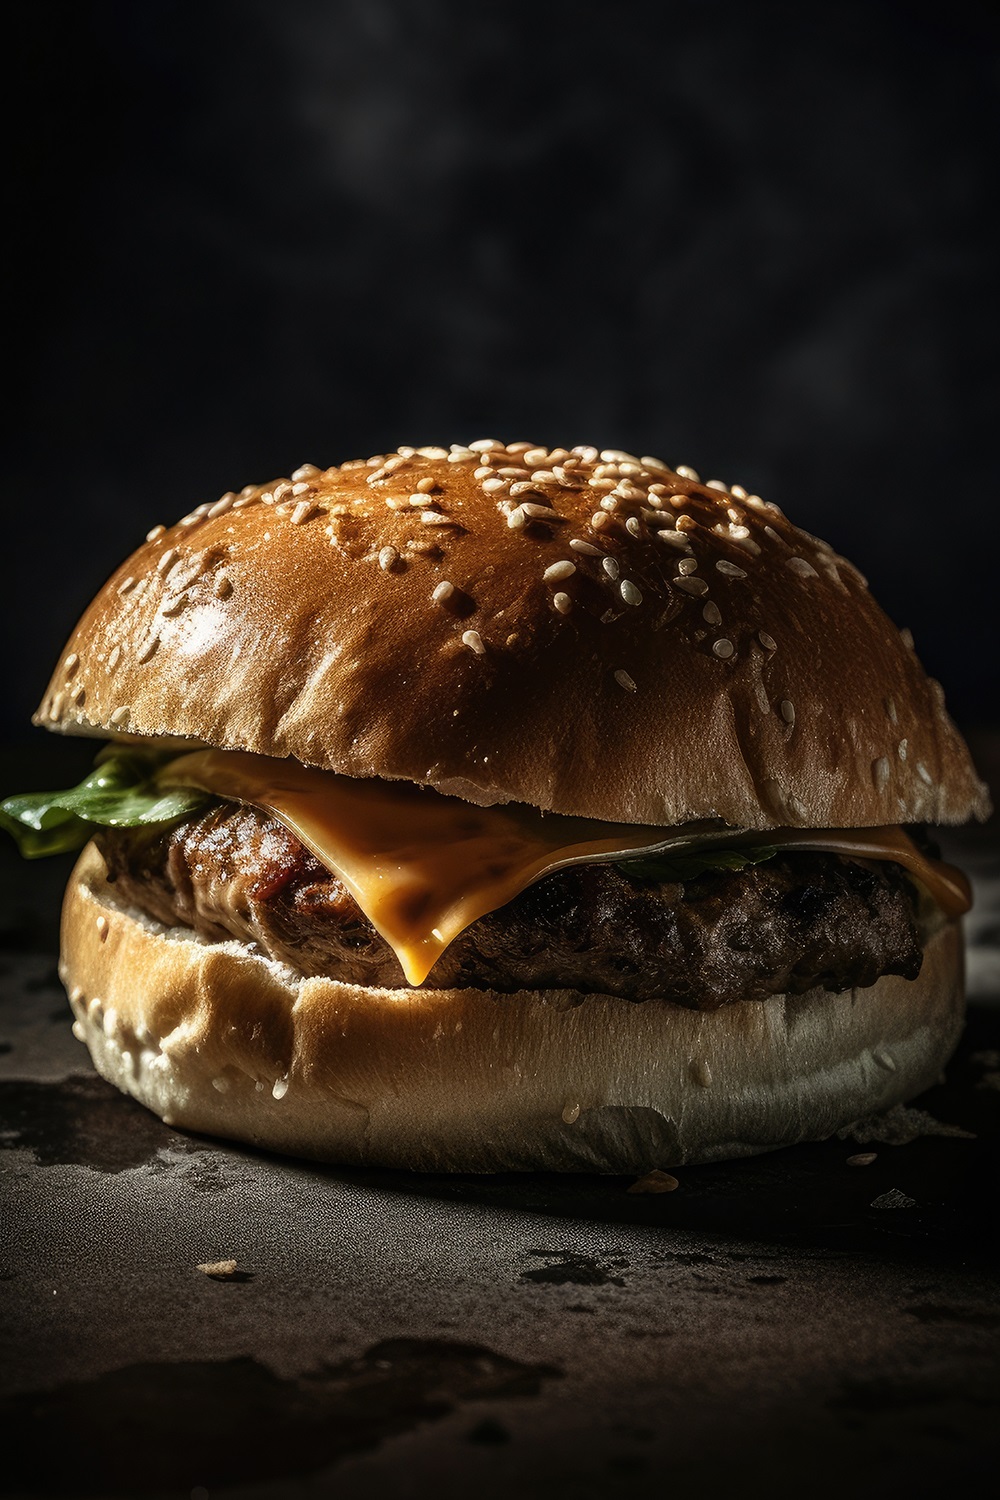 Side View Of A Burger On A Dark Rustic Background With Beef And Cream Cheese Realistic Closeup Photography pinterest preview image.